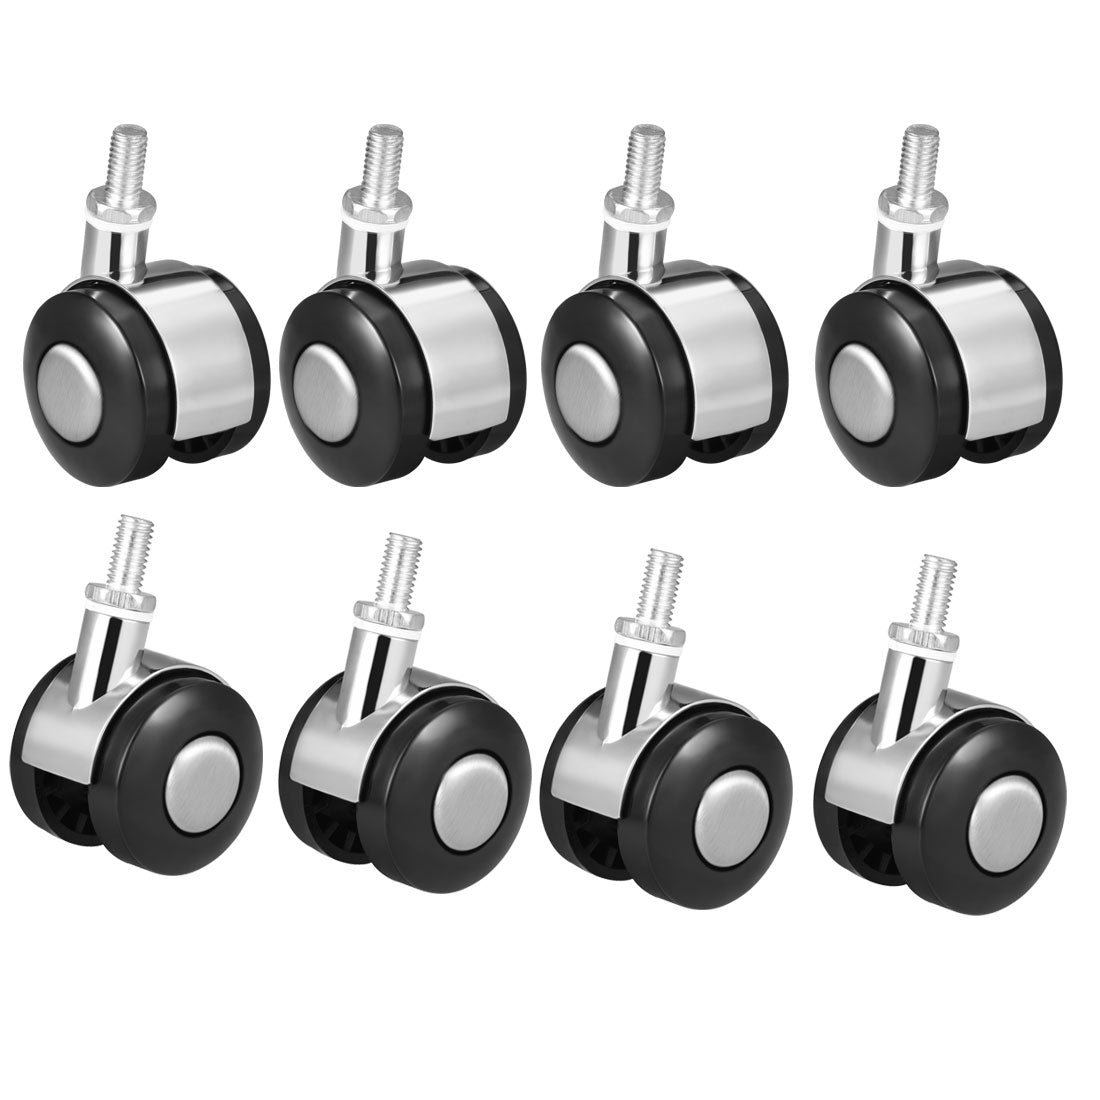 uxcell Uxcell Office Chair Casters Alloy Plastic 1.5 Inch Twin Wheel M8 x 15mm Threaded Stem Swivel Caster, 33lb Load Capacity, 8 Pcs